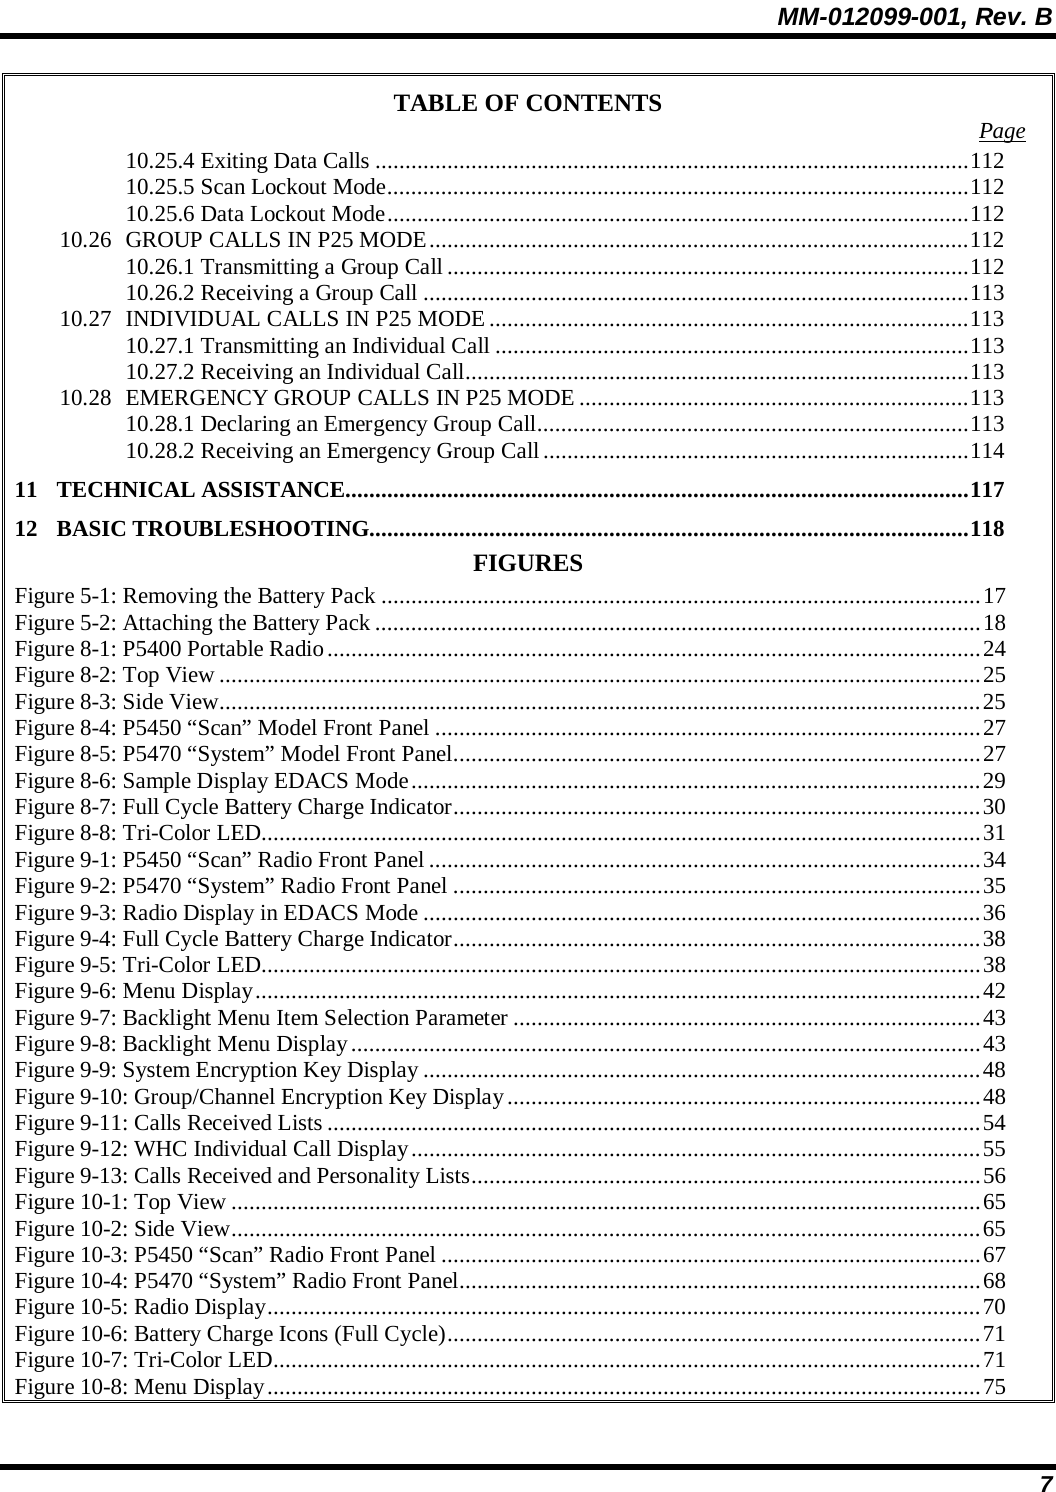 MM-012099-001, Rev. B 7 TABLE OF CONTENTS  Page 10.25.4 Exiting Data Calls ...................................................................................................112 10.25.5 Scan Lockout Mode.................................................................................................112 10.25.6 Data Lockout Mode.................................................................................................112 10.26 GROUP CALLS IN P25 MODE..........................................................................................112 10.26.1 Transmitting a Group Call .......................................................................................112 10.26.2 Receiving a Group Call ...........................................................................................113 10.27 INDIVIDUAL CALLS IN P25 MODE ................................................................................113 10.27.1 Transmitting an Individual Call ...............................................................................113 10.27.2 Receiving an Individual Call....................................................................................113 10.28 EMERGENCY GROUP CALLS IN P25 MODE .................................................................113 10.28.1 Declaring an Emergency Group Call........................................................................113 10.28.2 Receiving an Emergency Group Call.......................................................................114 11 TECHNICAL ASSISTANCE........................................................................................................117 12 BASIC TROUBLESHOOTING....................................................................................................118 FIGURES Figure 5-1: Removing the Battery Pack ....................................................................................................17 Figure 5-2: Attaching the Battery Pack .....................................................................................................18 Figure 8-1: P5400 Portable Radio.............................................................................................................24 Figure 8-2: Top View...............................................................................................................................25 Figure 8-3: Side View...............................................................................................................................25 Figure 8-4: P5450 “Scan” Model Front Panel ...........................................................................................27 Figure 8-5: P5470 “System” Model Front Panel........................................................................................27 Figure 8-6: Sample Display EDACS Mode...............................................................................................29 Figure 8-7: Full Cycle Battery Charge Indicator........................................................................................30 Figure 8-8: Tri-Color LED........................................................................................................................31 Figure 9-1: P5450 “Scan” Radio Front Panel ............................................................................................34 Figure 9-2: P5470 “System” Radio Front Panel ........................................................................................35 Figure 9-3: Radio Display in EDACS Mode .............................................................................................36 Figure 9-4: Full Cycle Battery Charge Indicator........................................................................................38 Figure 9-5: Tri-Color LED........................................................................................................................38 Figure 9-6: Menu Display.........................................................................................................................42 Figure 9-7: Backlight Menu Item Selection Parameter ..............................................................................43 Figure 9-8: Backlight Menu Display.........................................................................................................43 Figure 9-9: System Encryption Key Display .............................................................................................48 Figure 9-10: Group/Channel Encryption Key Display...............................................................................48 Figure 9-11: Calls Received Lists .............................................................................................................54 Figure 9-12: WHC Individual Call Display...............................................................................................55 Figure 9-13: Calls Received and Personality Lists.....................................................................................56 Figure 10-1: Top View .............................................................................................................................65 Figure 10-2: Side View.............................................................................................................................65 Figure 10-3: P5450 “Scan” Radio Front Panel ..........................................................................................67 Figure 10-4: P5470 “System” Radio Front Panel.......................................................................................68 Figure 10-5: Radio Display.......................................................................................................................70 Figure 10-6: Battery Charge Icons (Full Cycle).........................................................................................71 Figure 10-7: Tri-Color LED......................................................................................................................71 Figure 10-8: Menu Display.......................................................................................................................75 